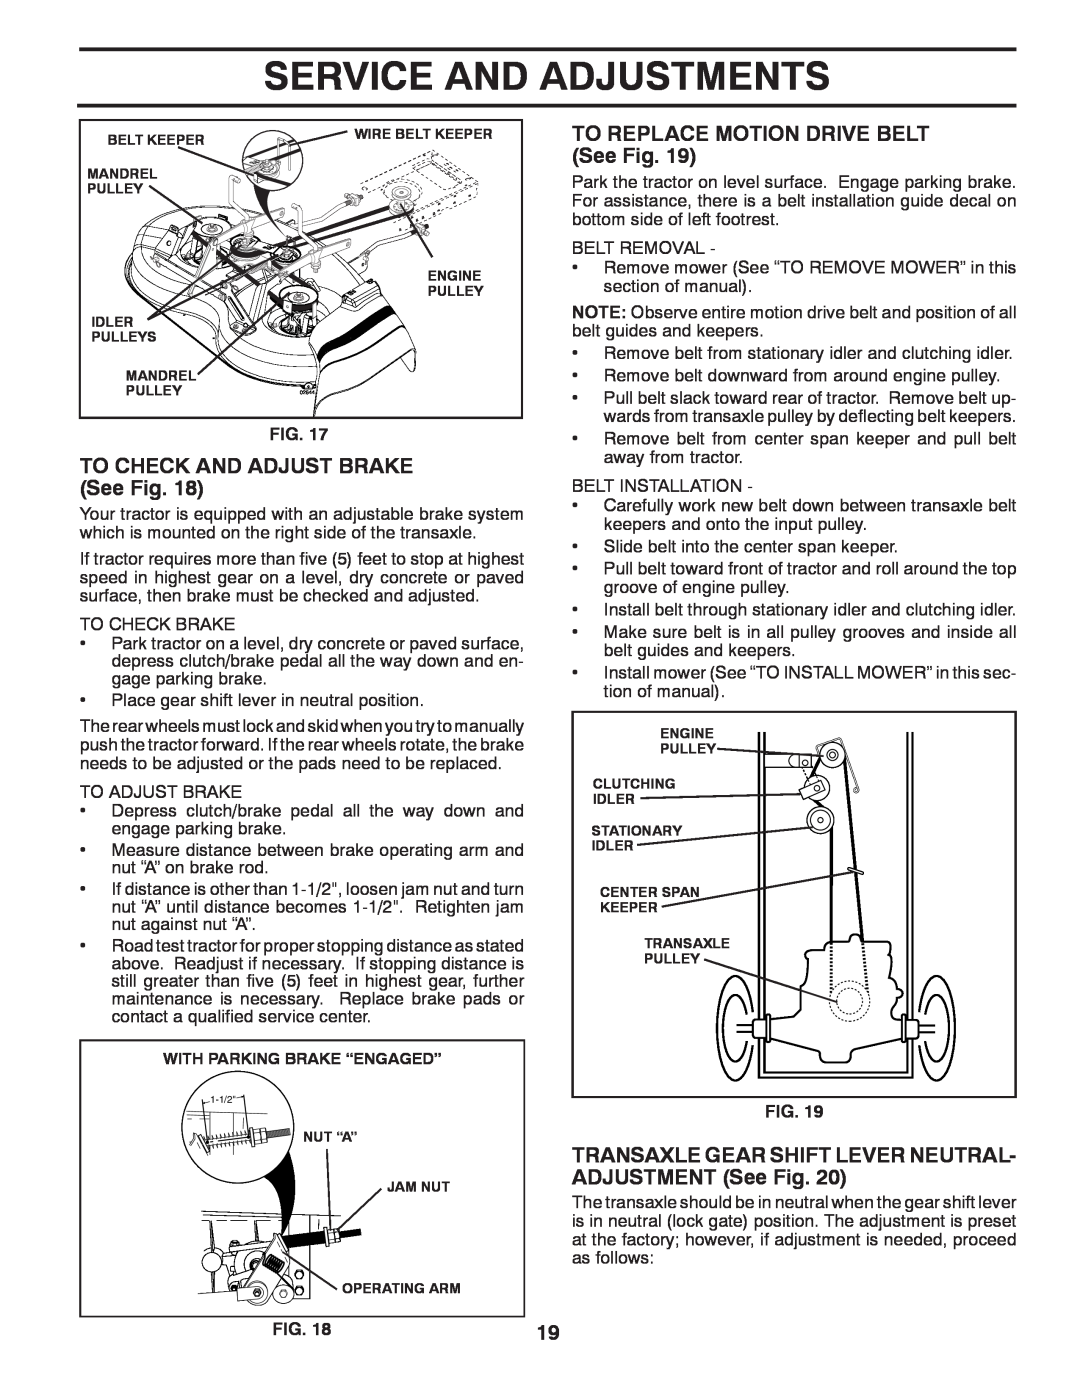 McCulloch 532 40 80-72 TO CHECK AND ADJUST BRAKE See Fig, TO REPLACE MOTION DRIVE BELT See Fig, Service And Adjustments 